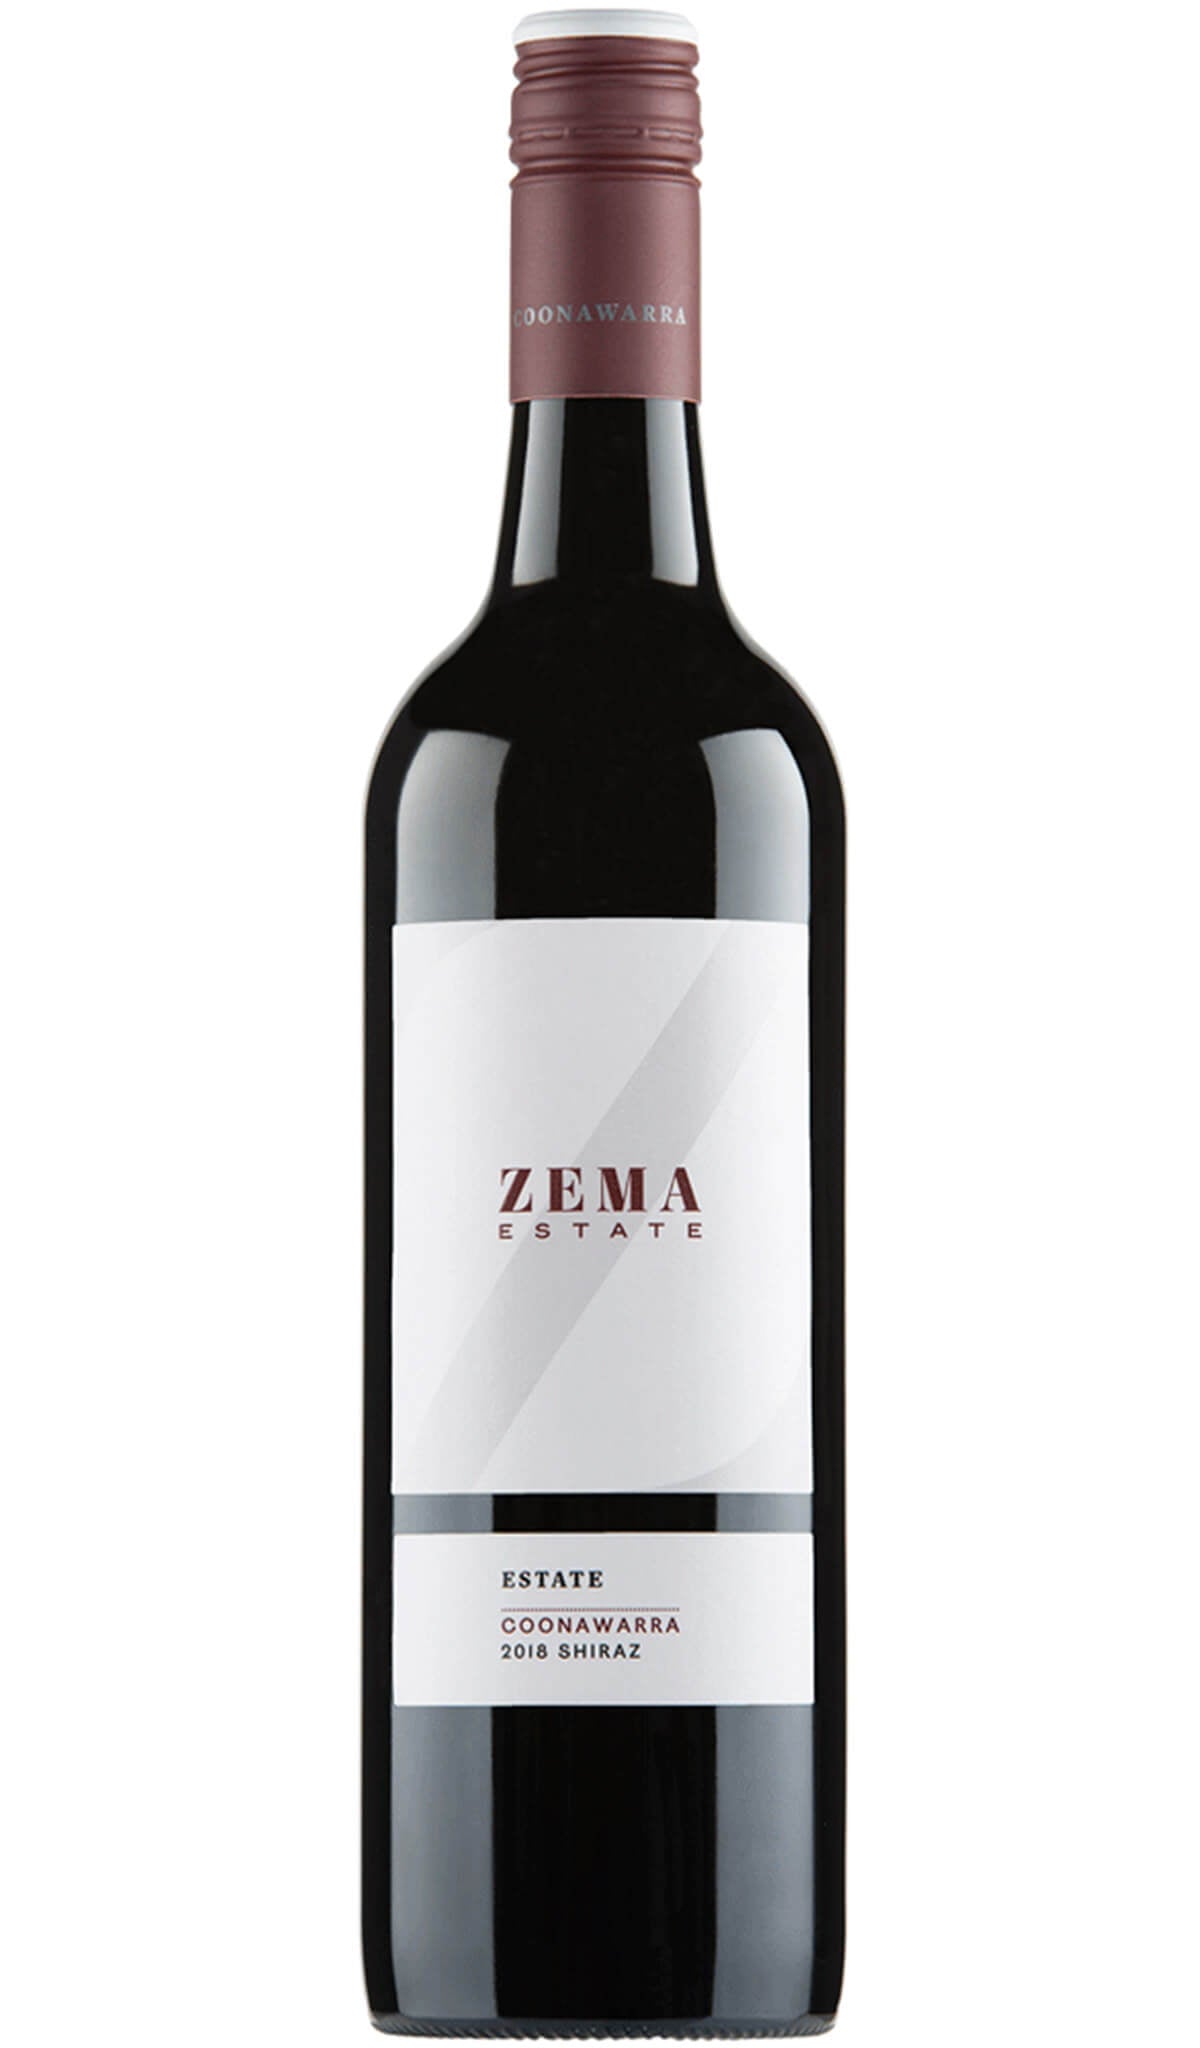 Find out more or buy Zema Estate Shiraz 2018 (Coonawarra) online at Wine Sellers Direct - Australia’s independent liquor specialists.